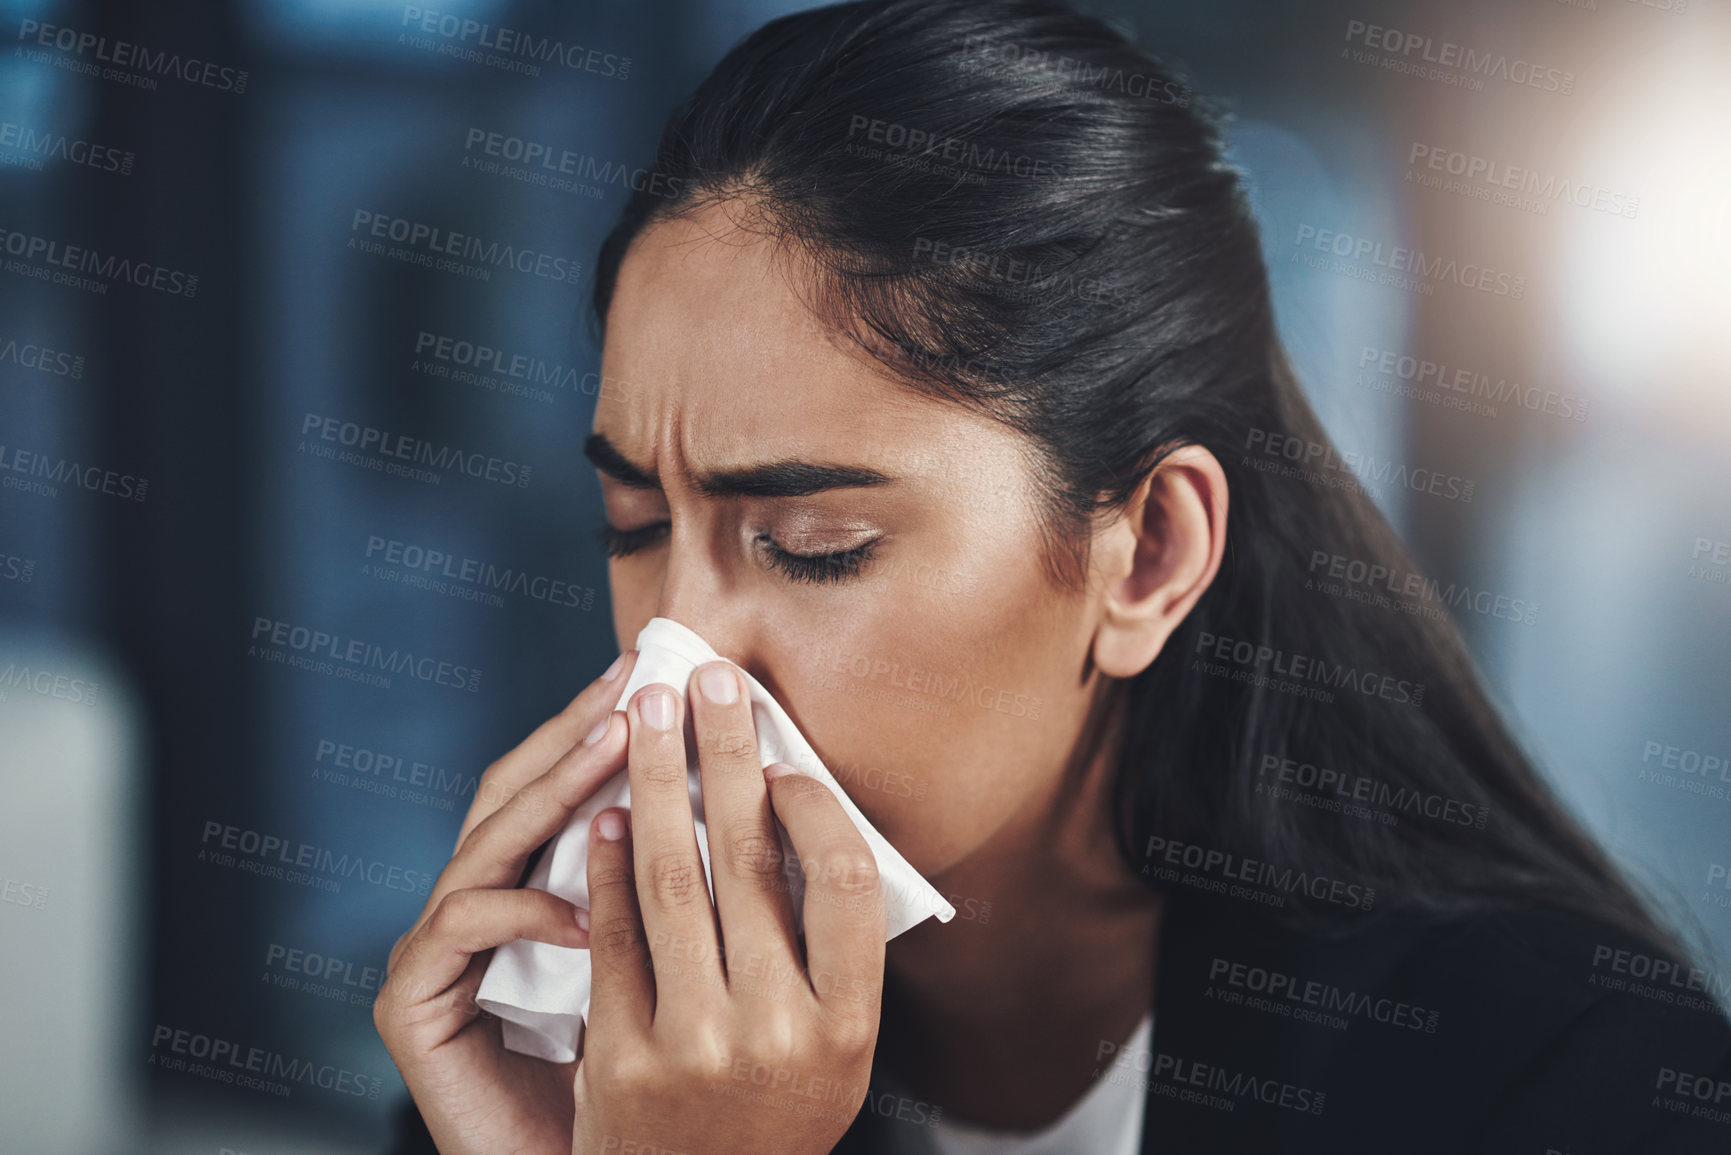 Buy stock photo Shot of a young businesswoman blowing her nose in an office